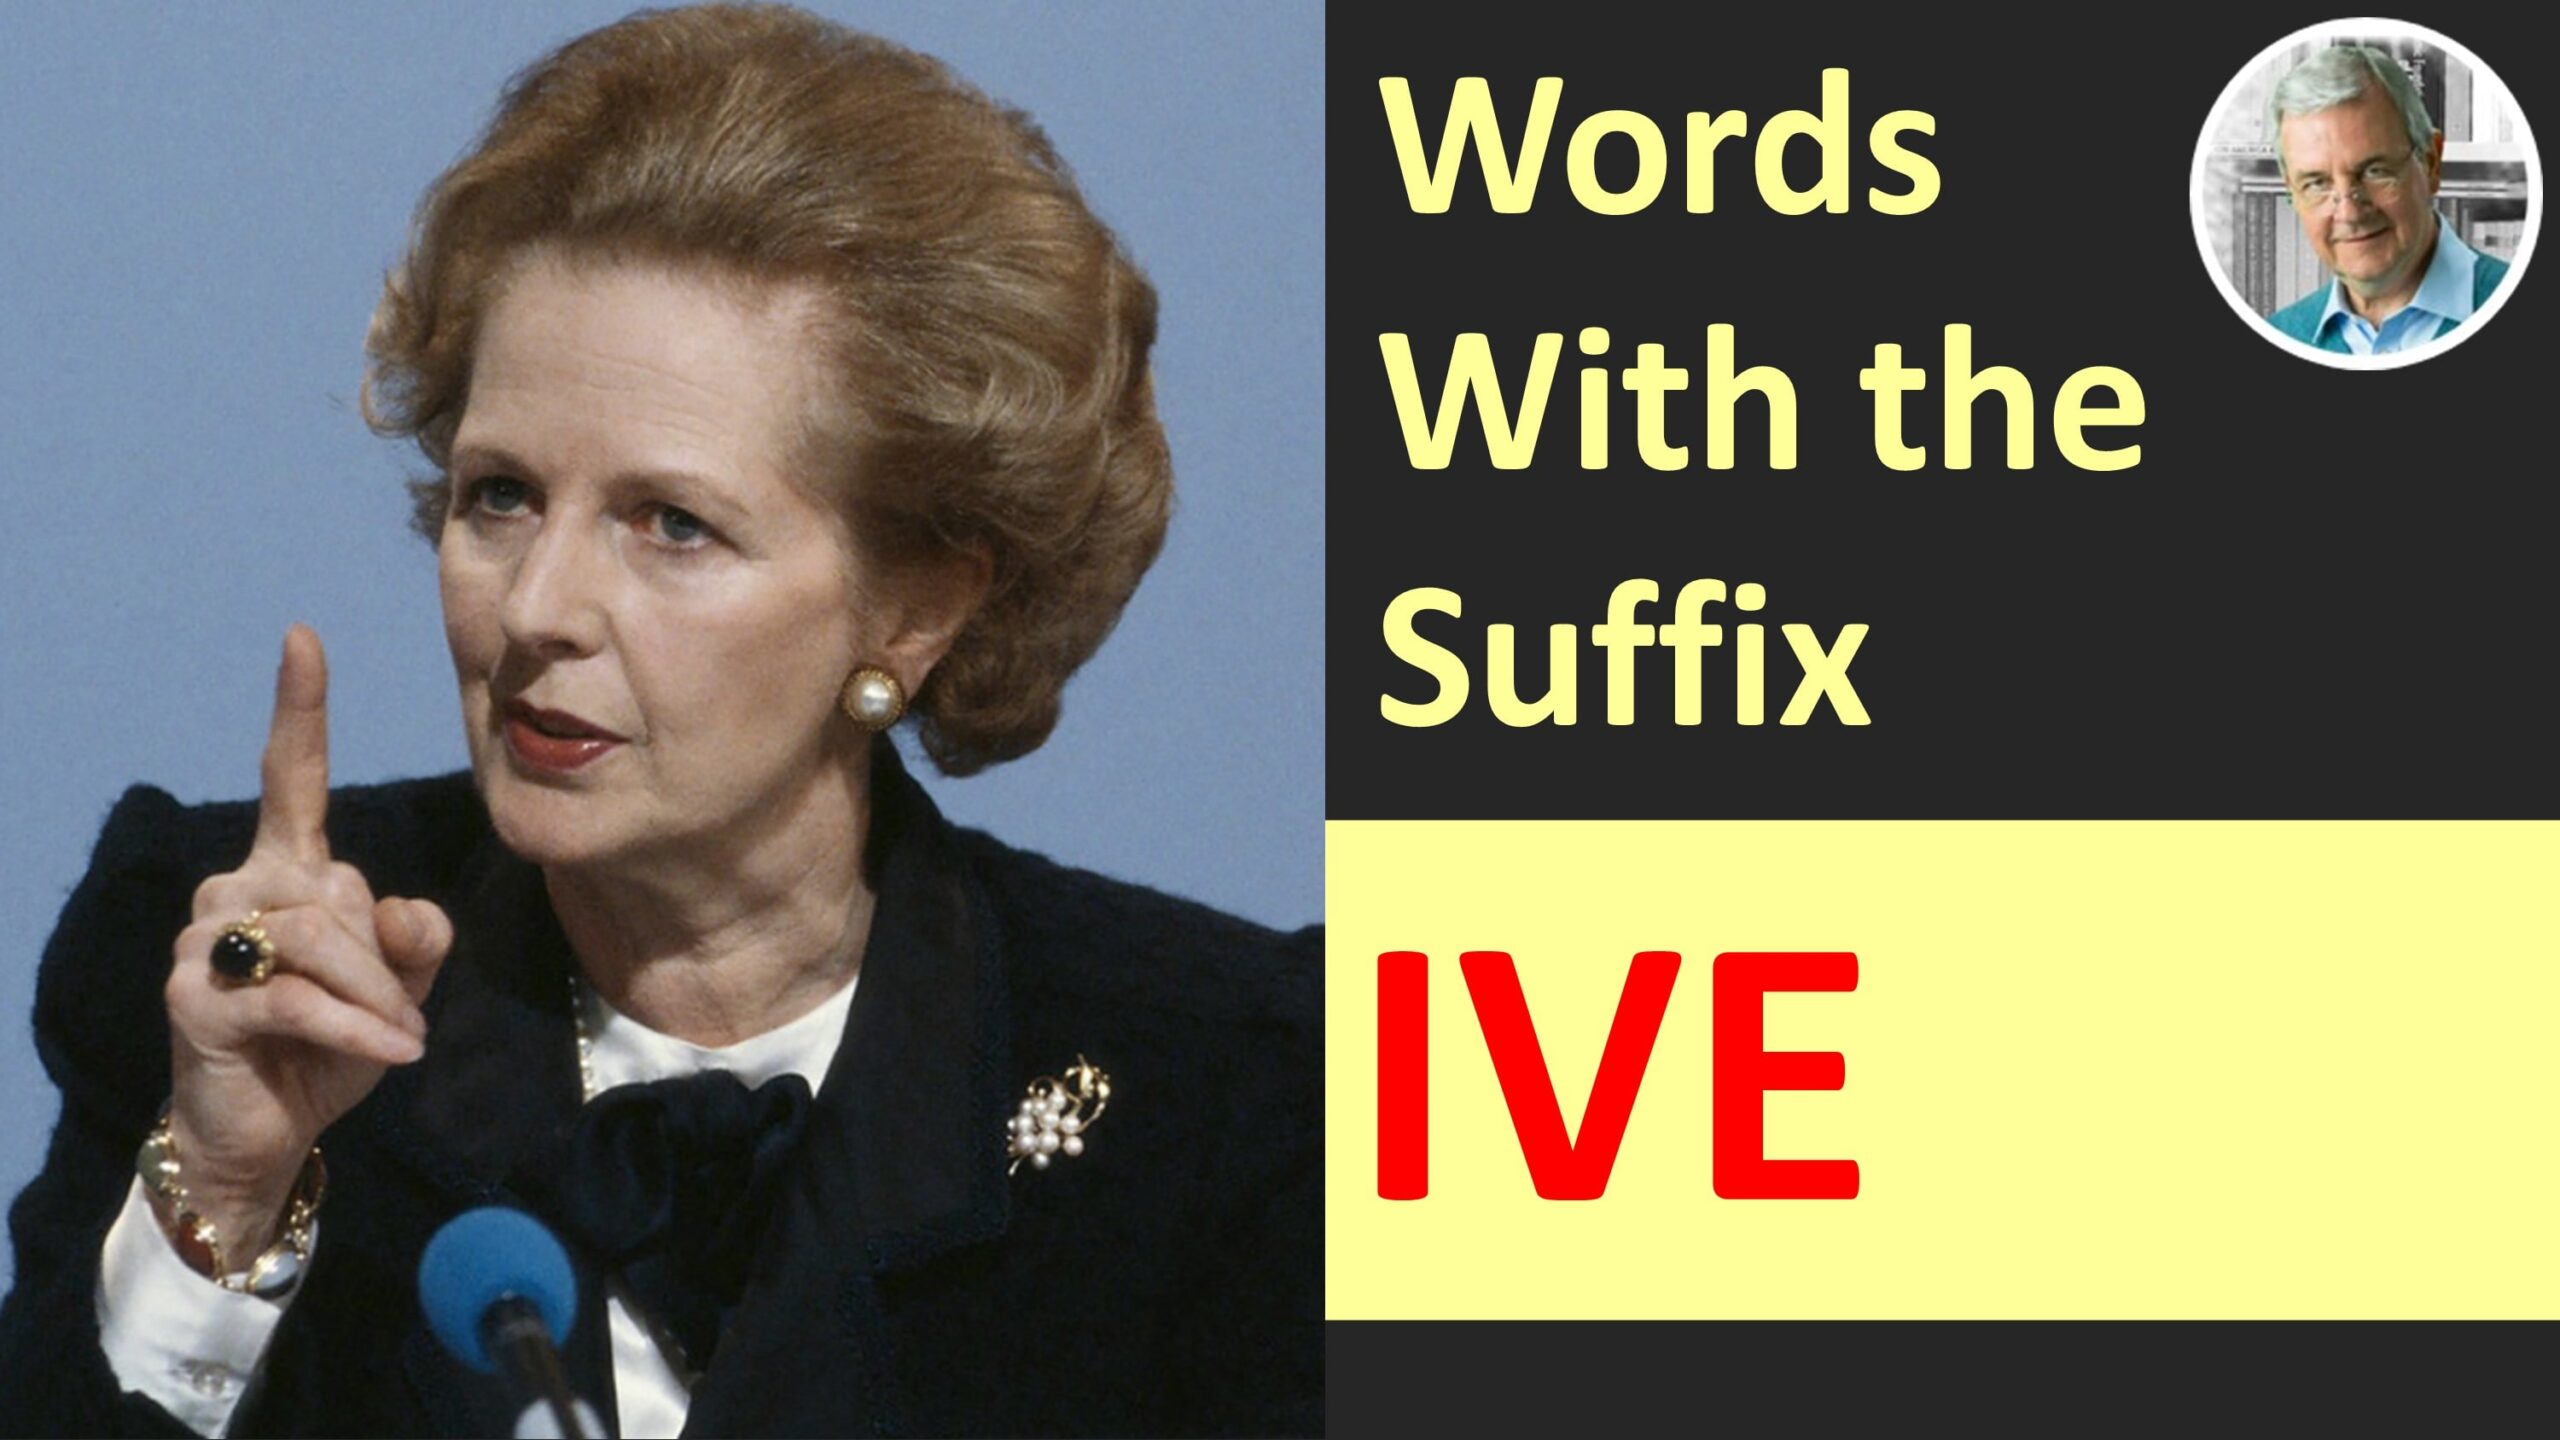 meaning of suffix ive